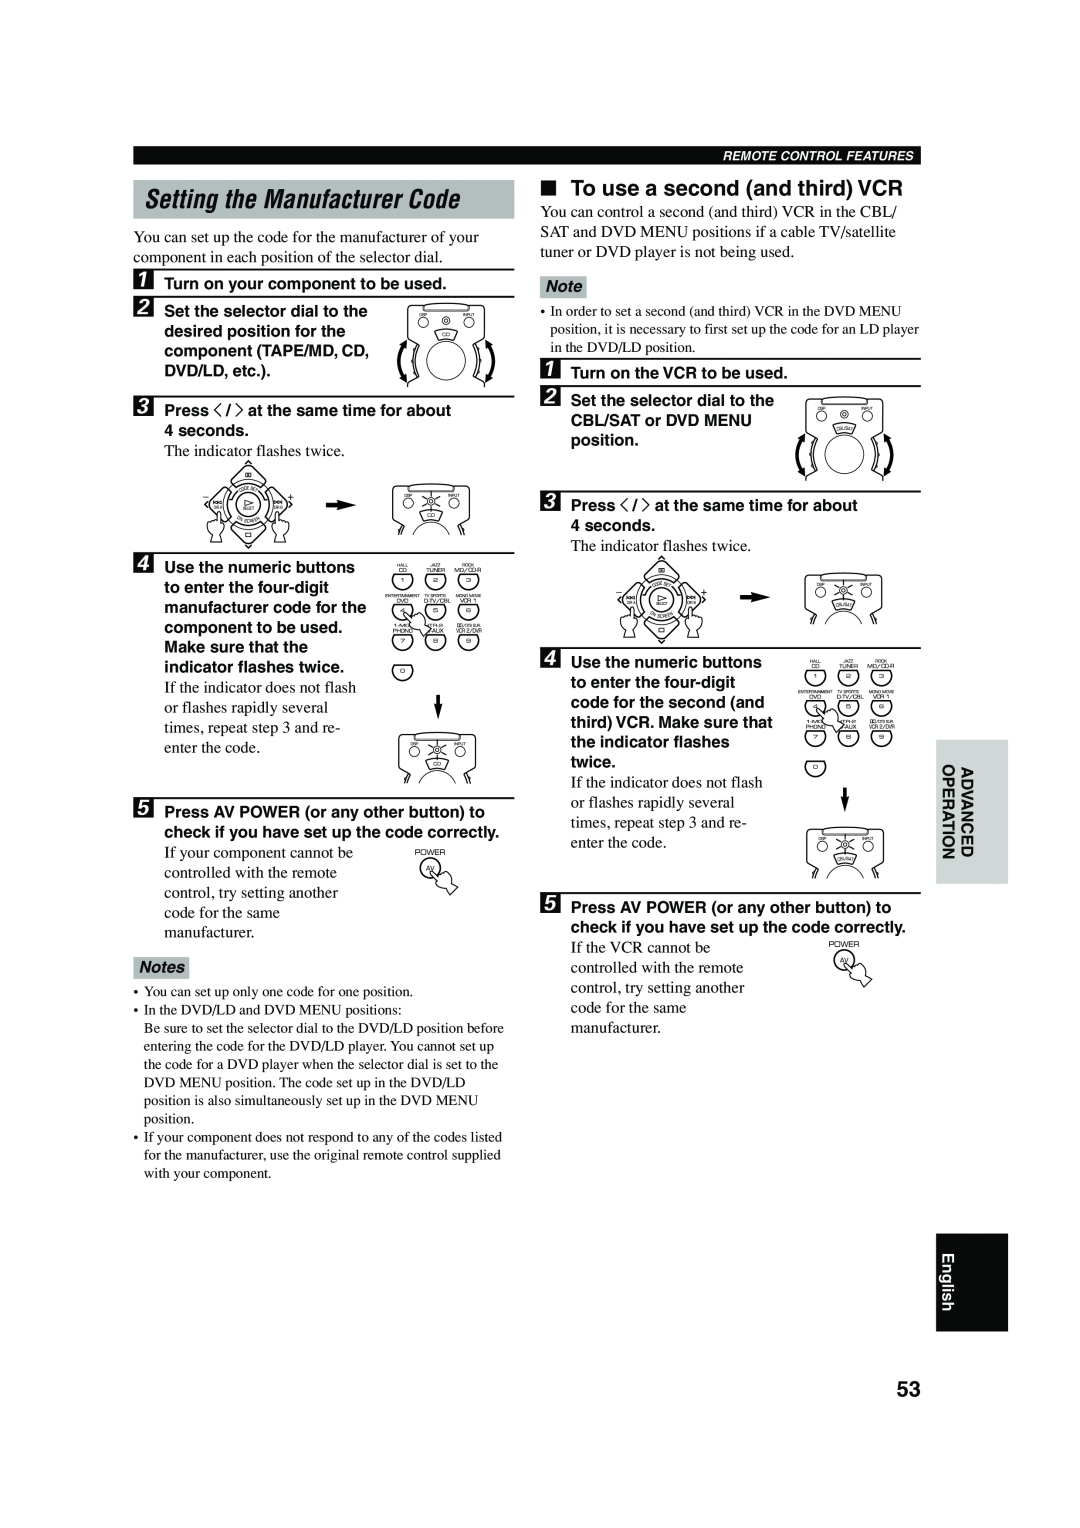 Yamaha RX-V620RDS Setting the Manufacturer Code, To use a second and third VCR, Turn on your component to be used, English 